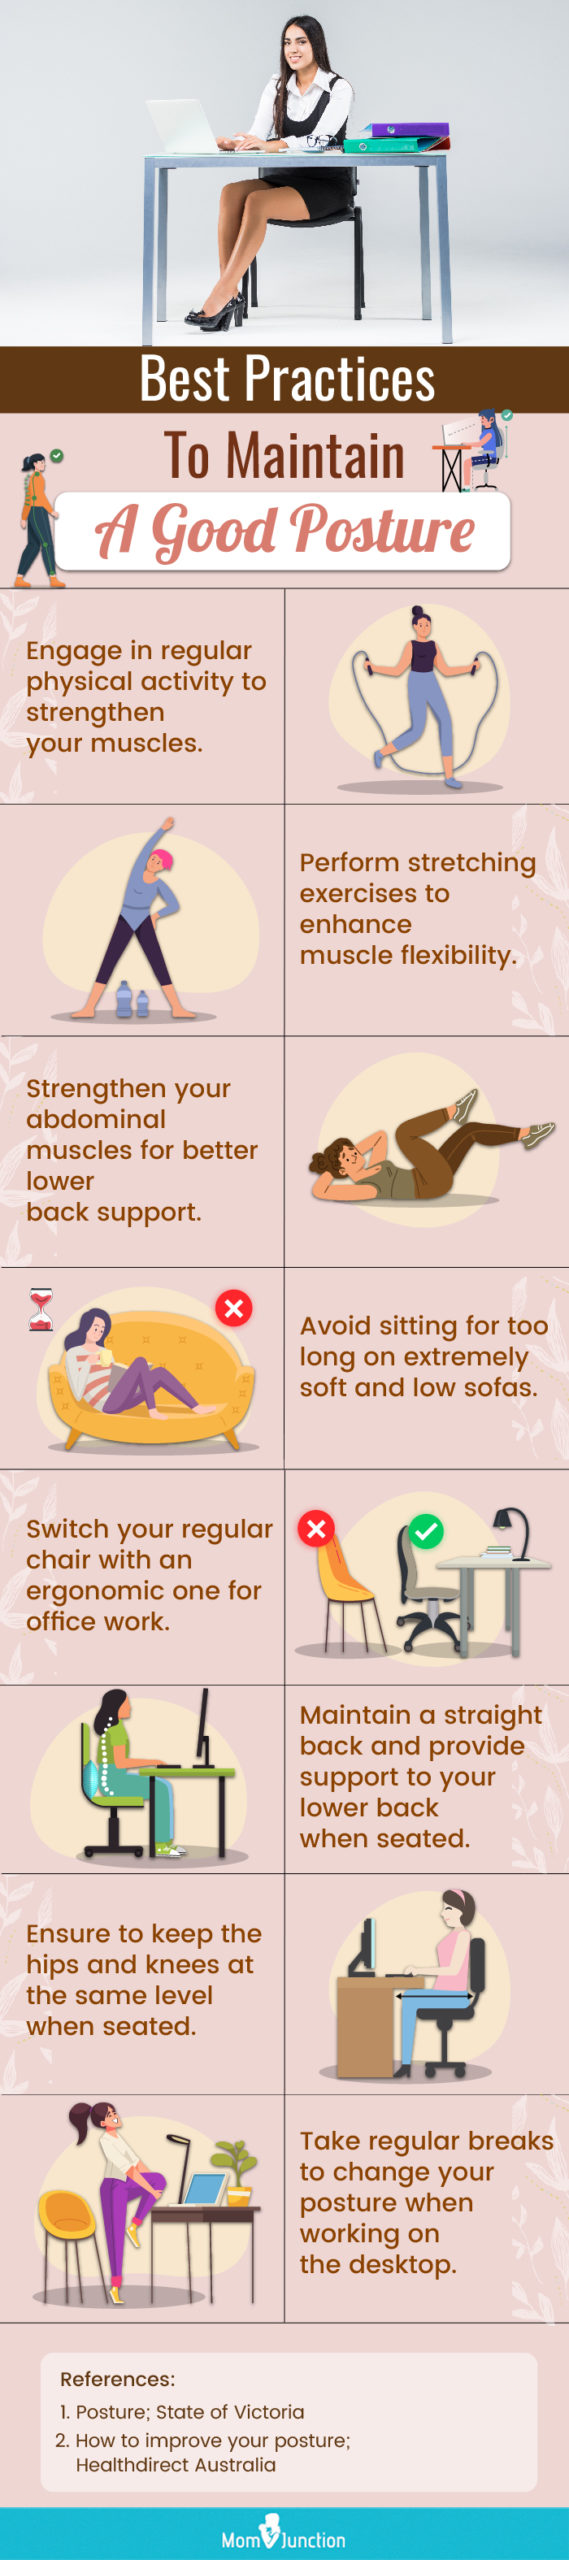 Best Practices To Maintain A Good Posture (infographic)